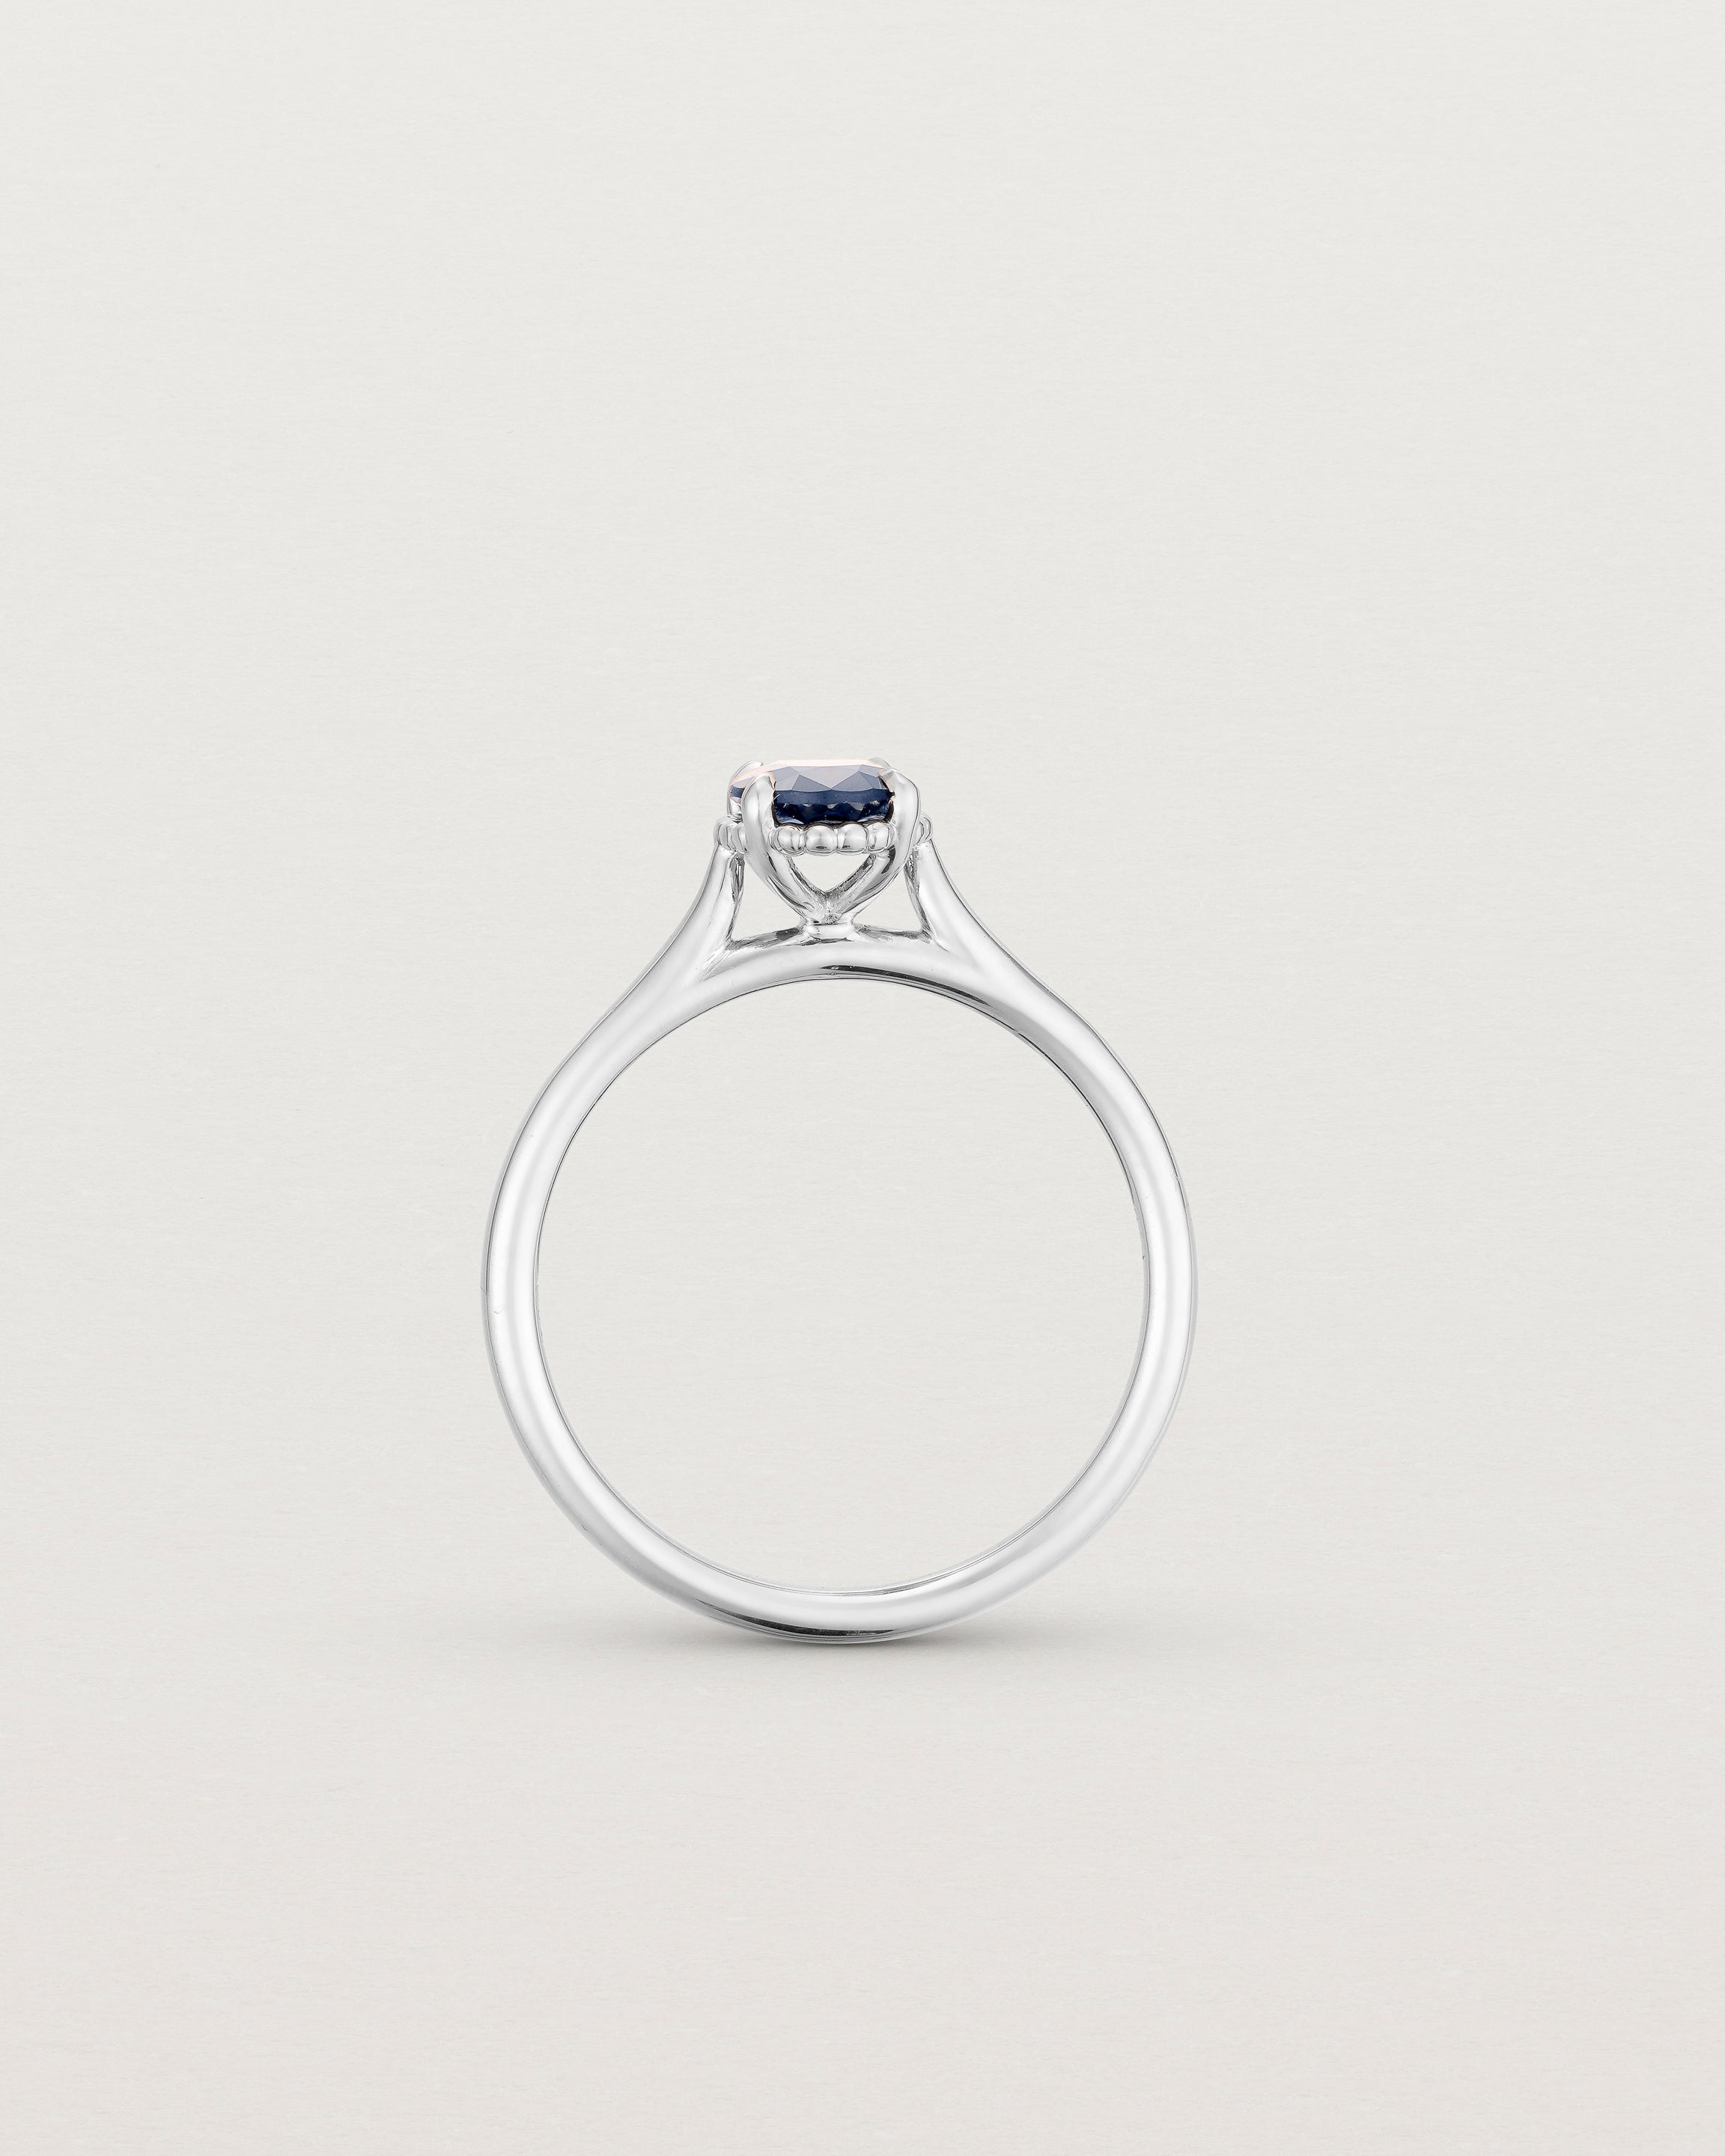 A side profile of the Thea Oval Solitaire with a deep blue Australian Sapphire set in White Gold